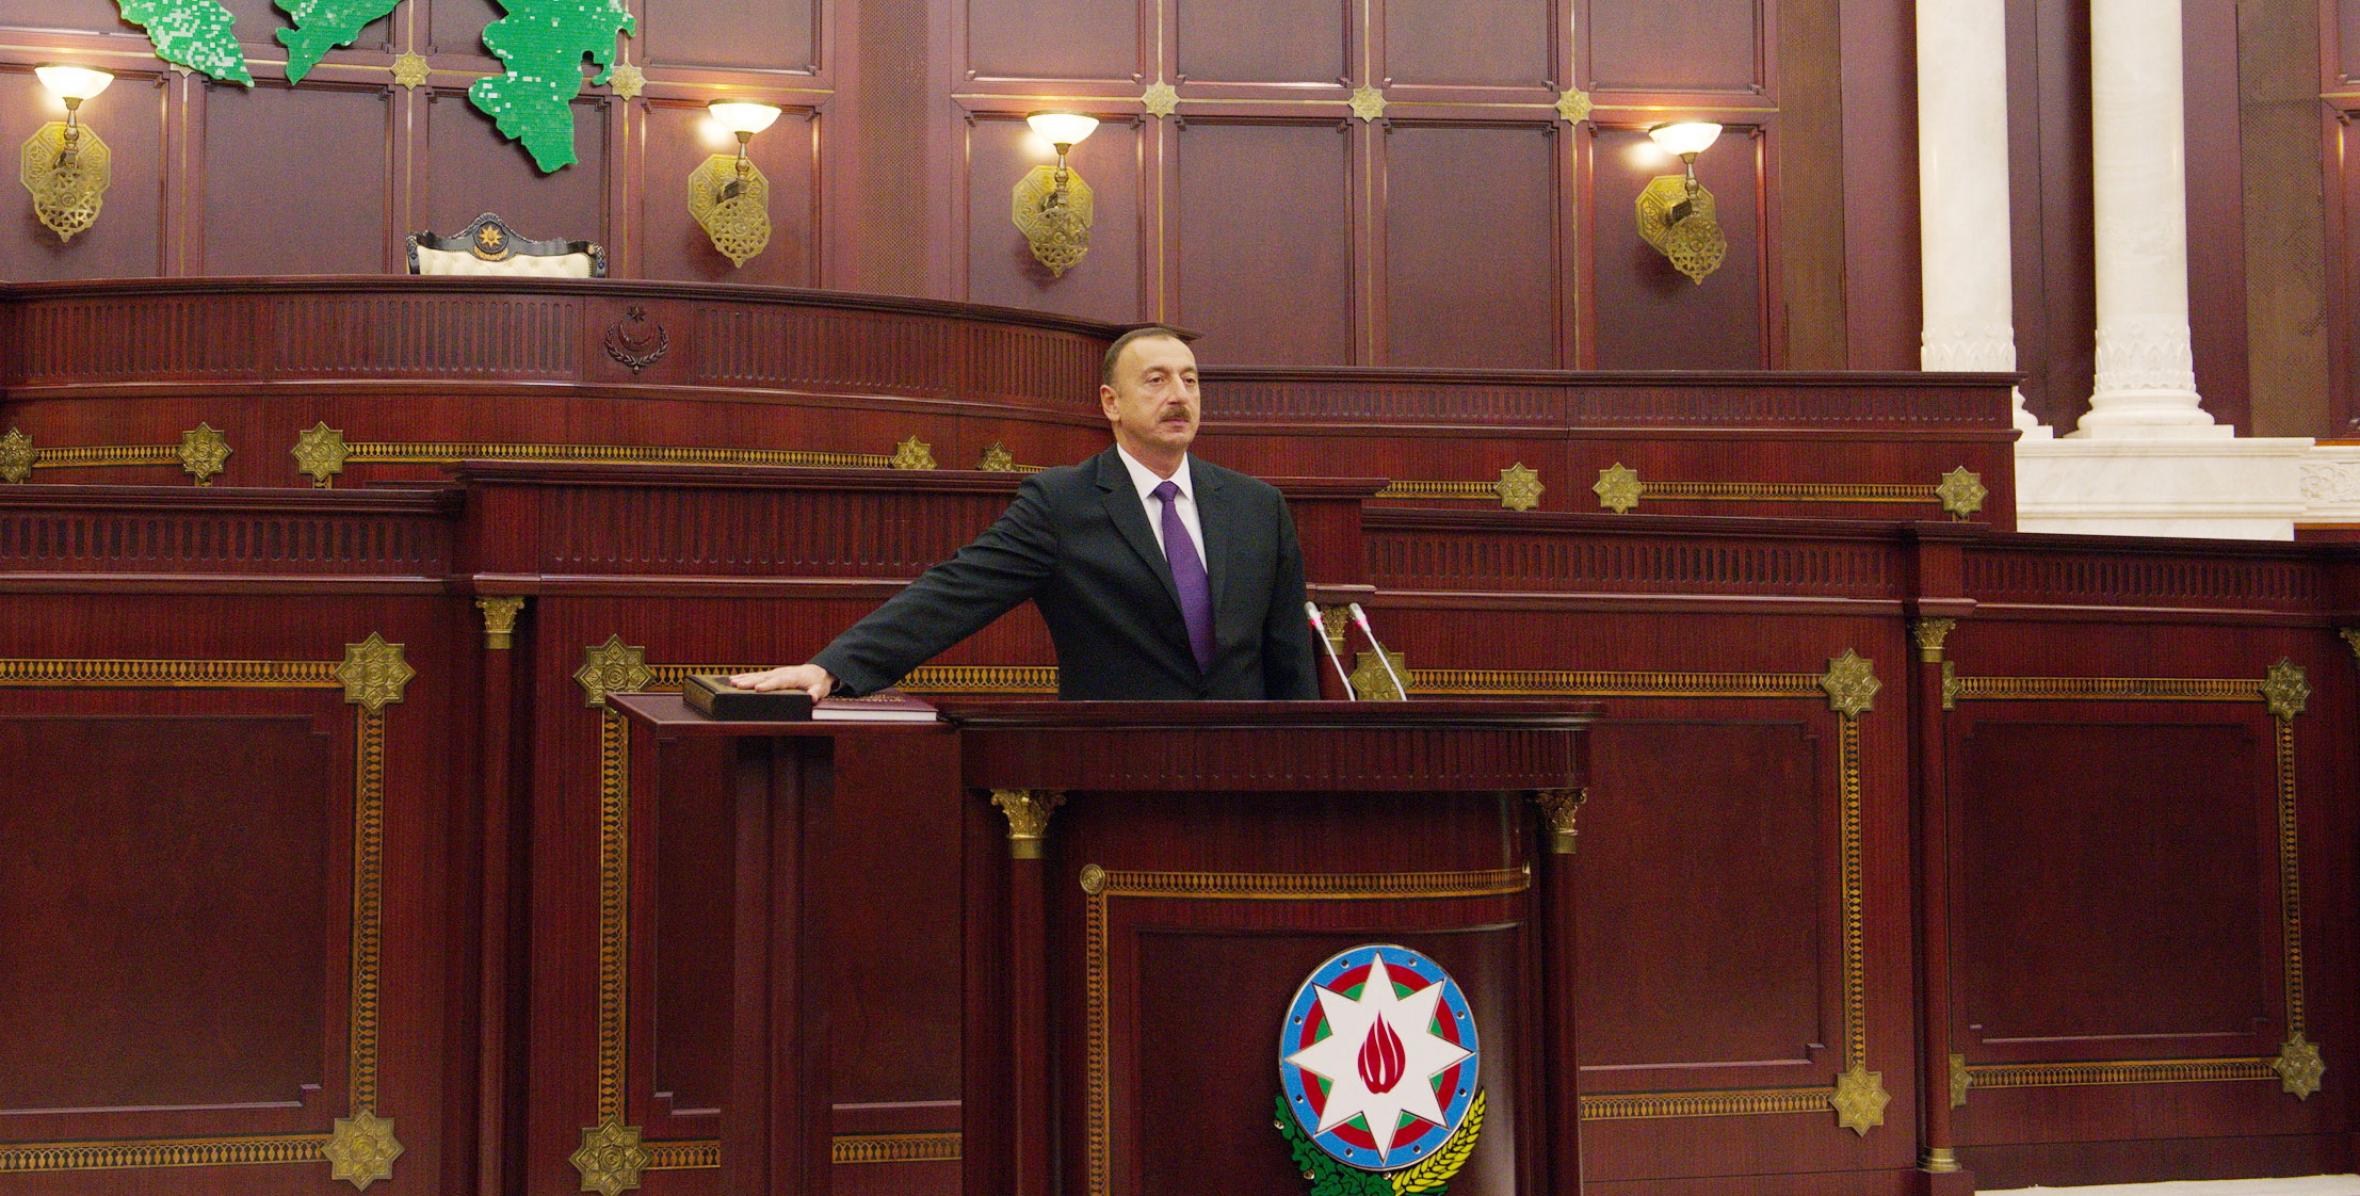 Speech by President of the Republic of Azerbaijan Ilham Aliyev at the inauguration ceremony